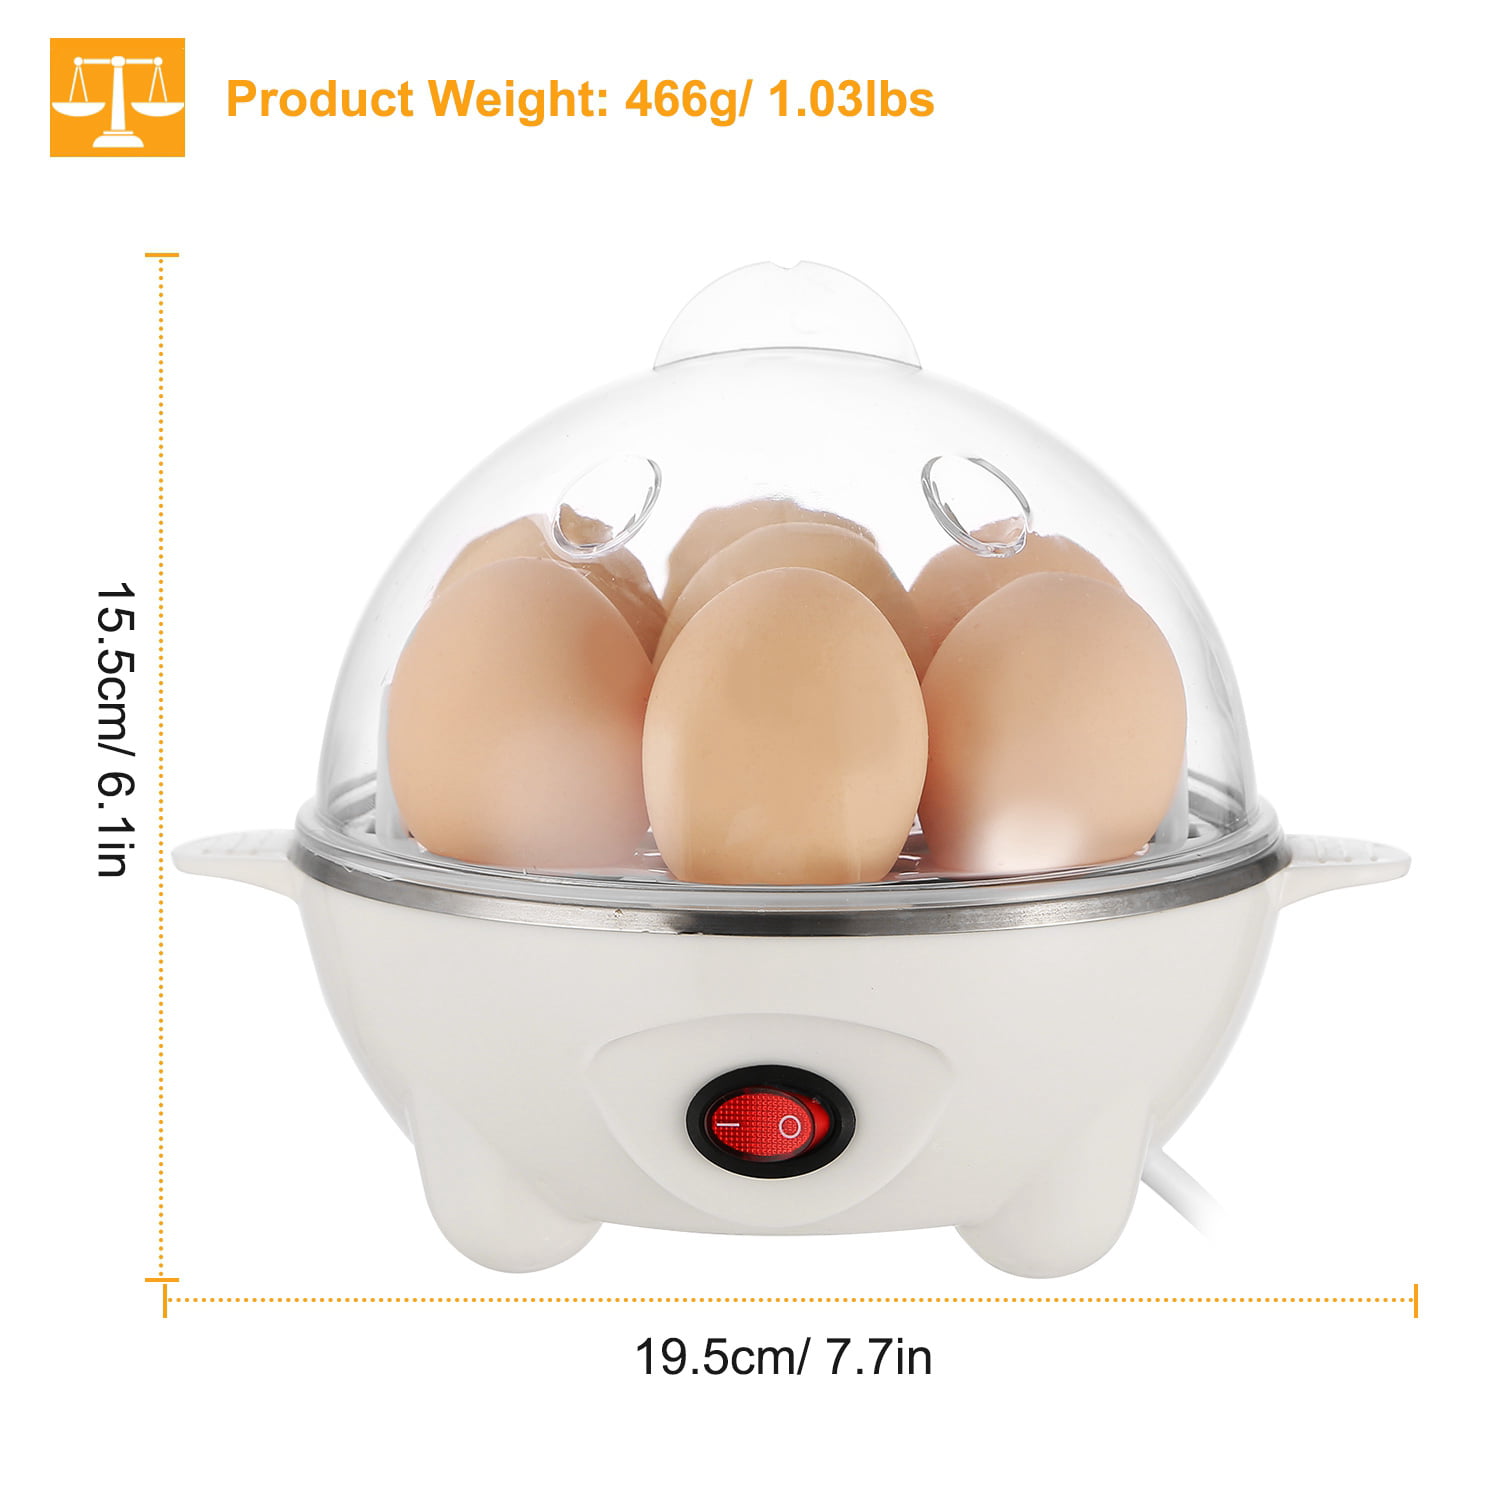 Duronic EB35 7 Egg Boiler Poacher, Steamer Cooker with Timer and Buzzer,  Includes Egg Cup Piercer & Water Cup, 350W - white